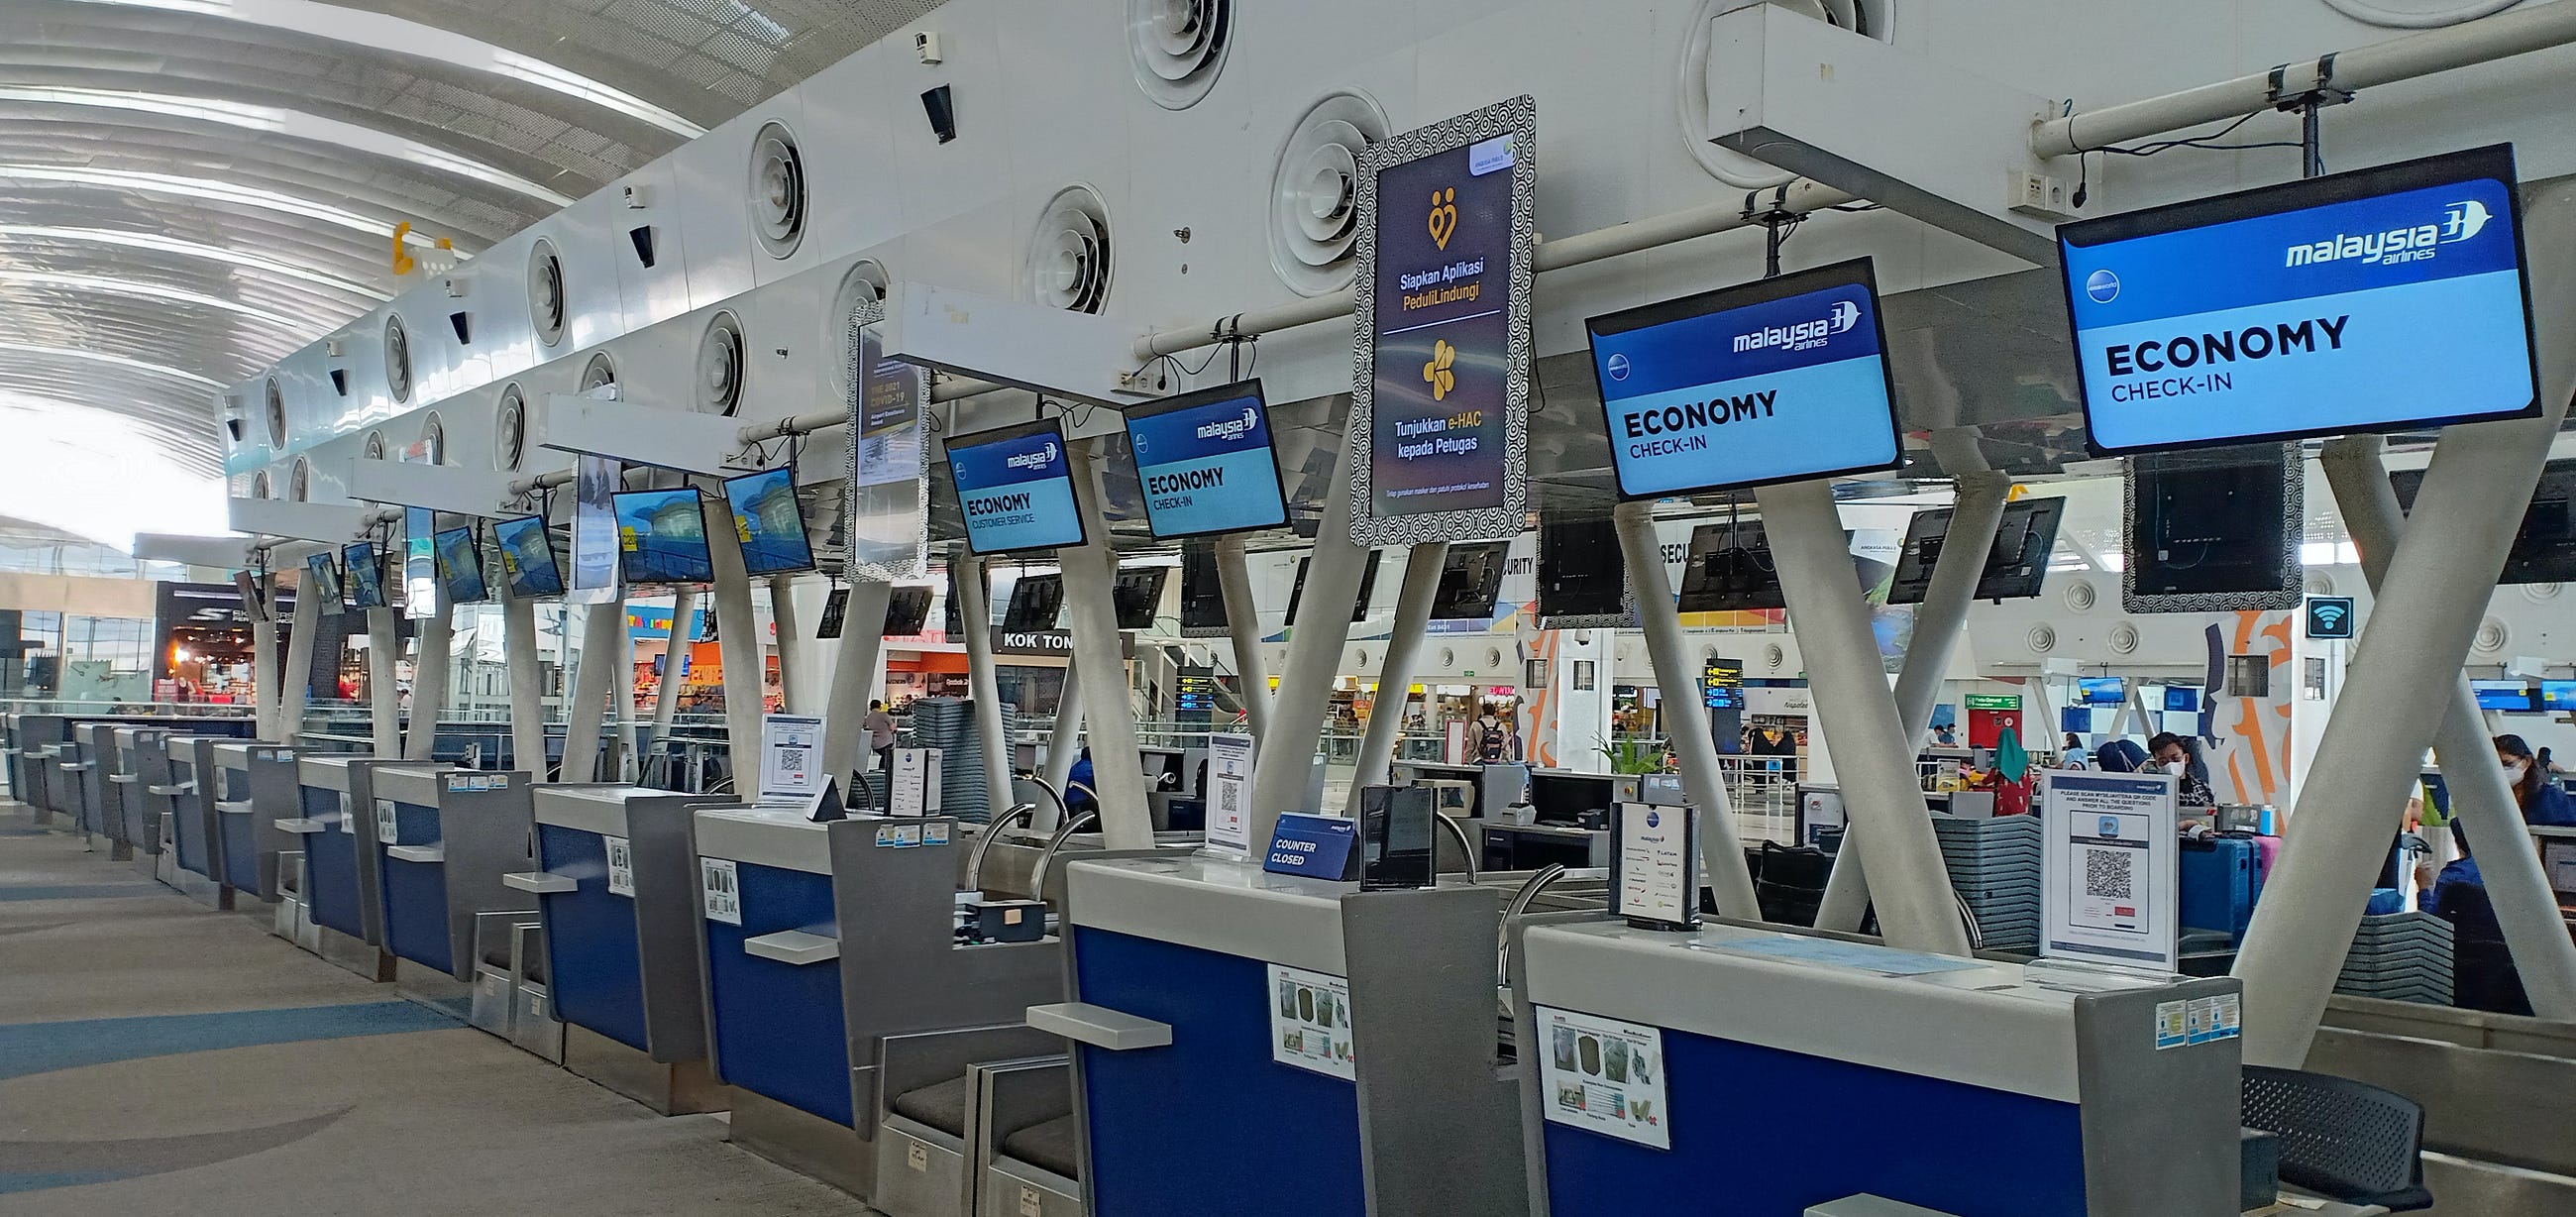 Innovating Customer Experience in Aviation 3: Creating a Seamless Airport Experience